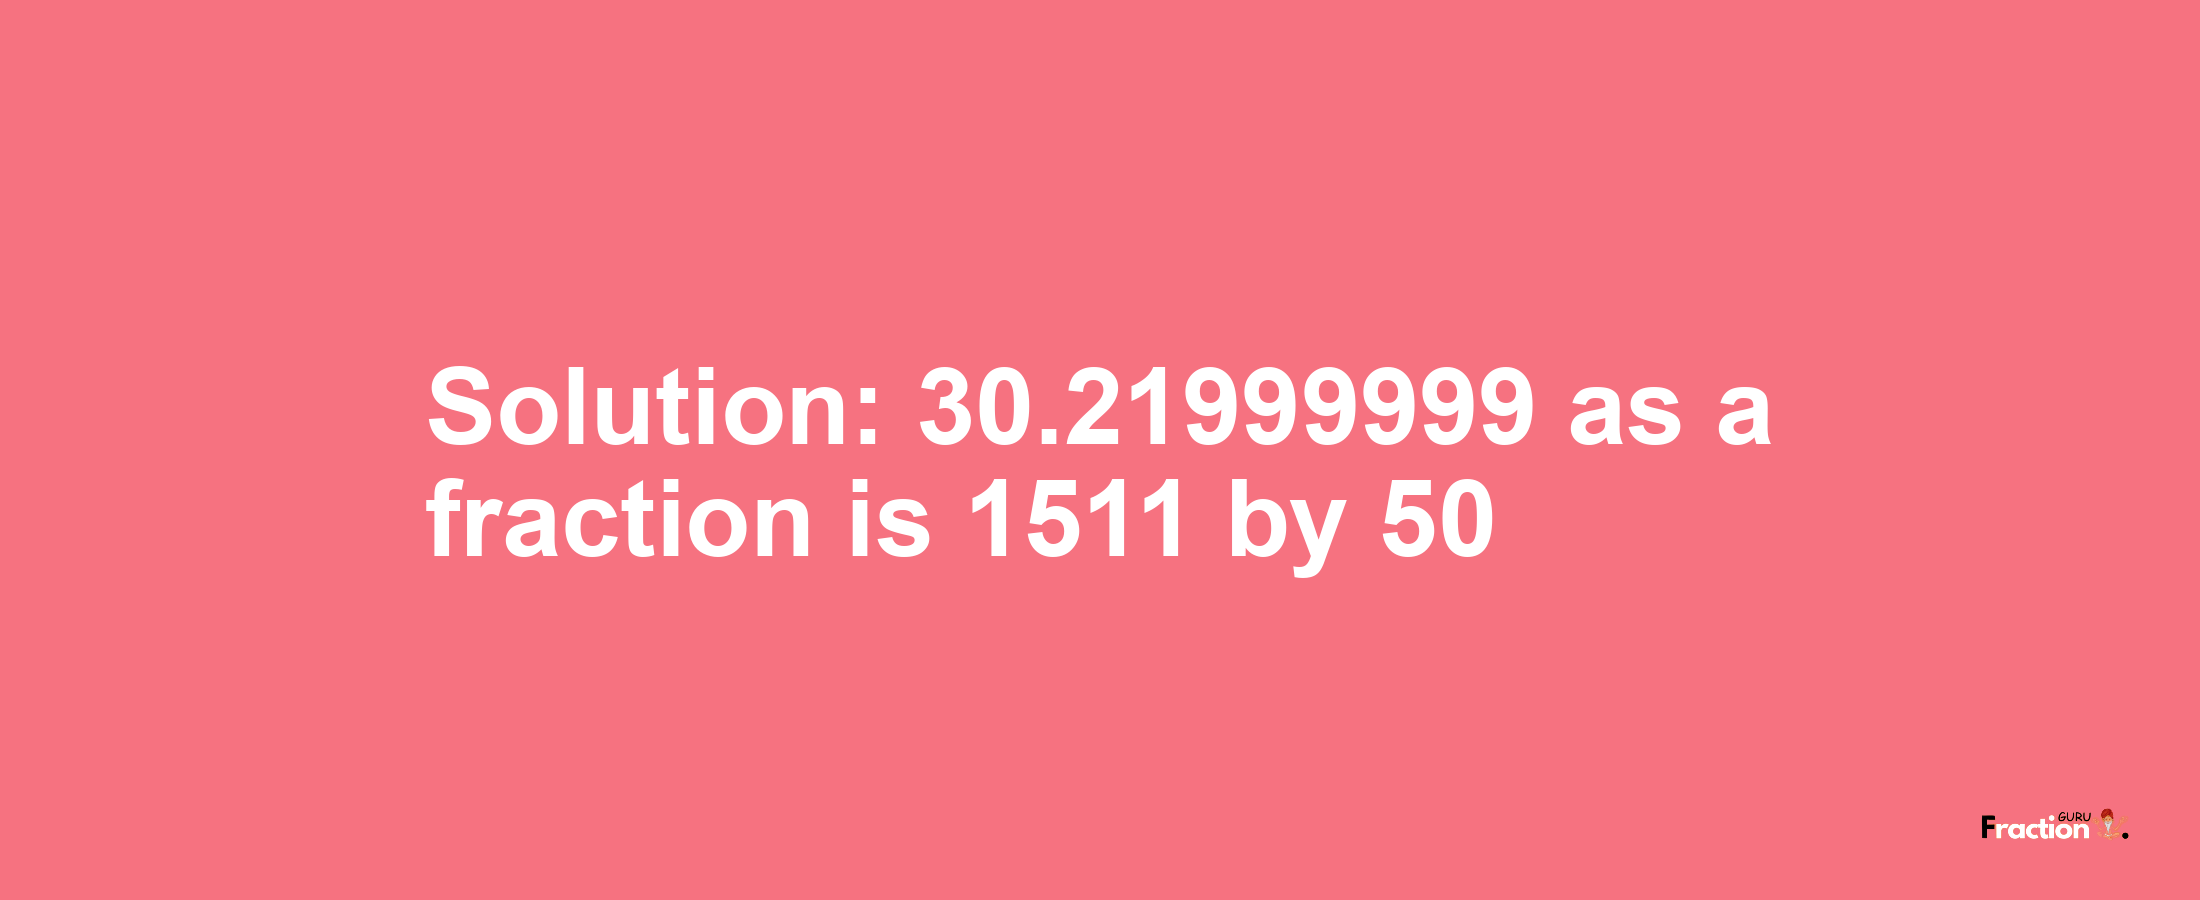 Solution:30.21999999 as a fraction is 1511/50